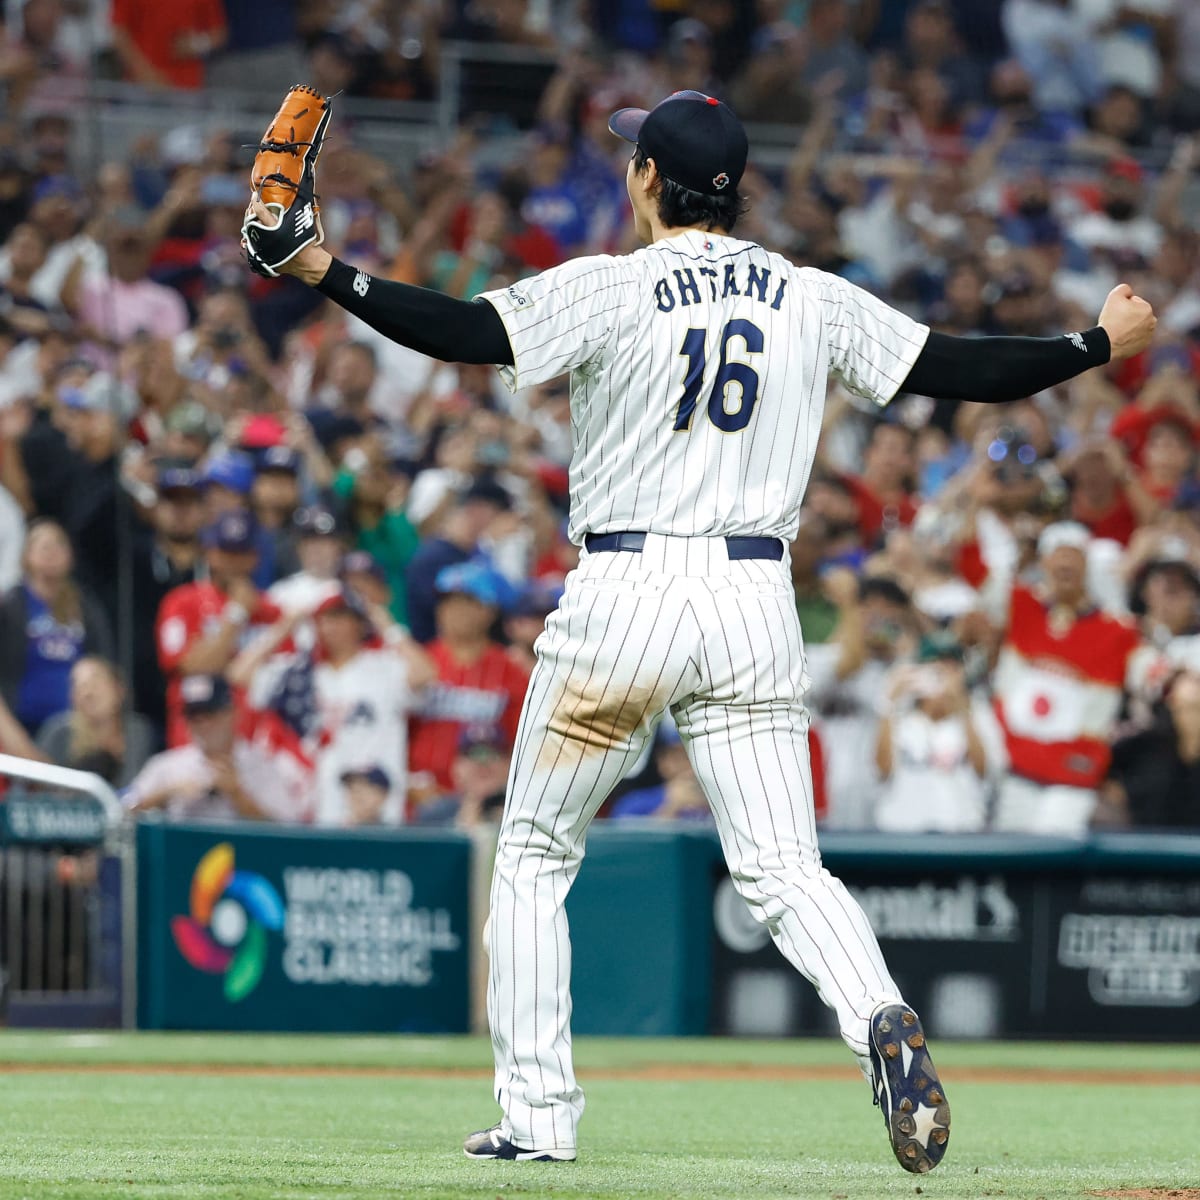 Cubs reportedly 'sleeper' team for superstar Shohei Ohtani